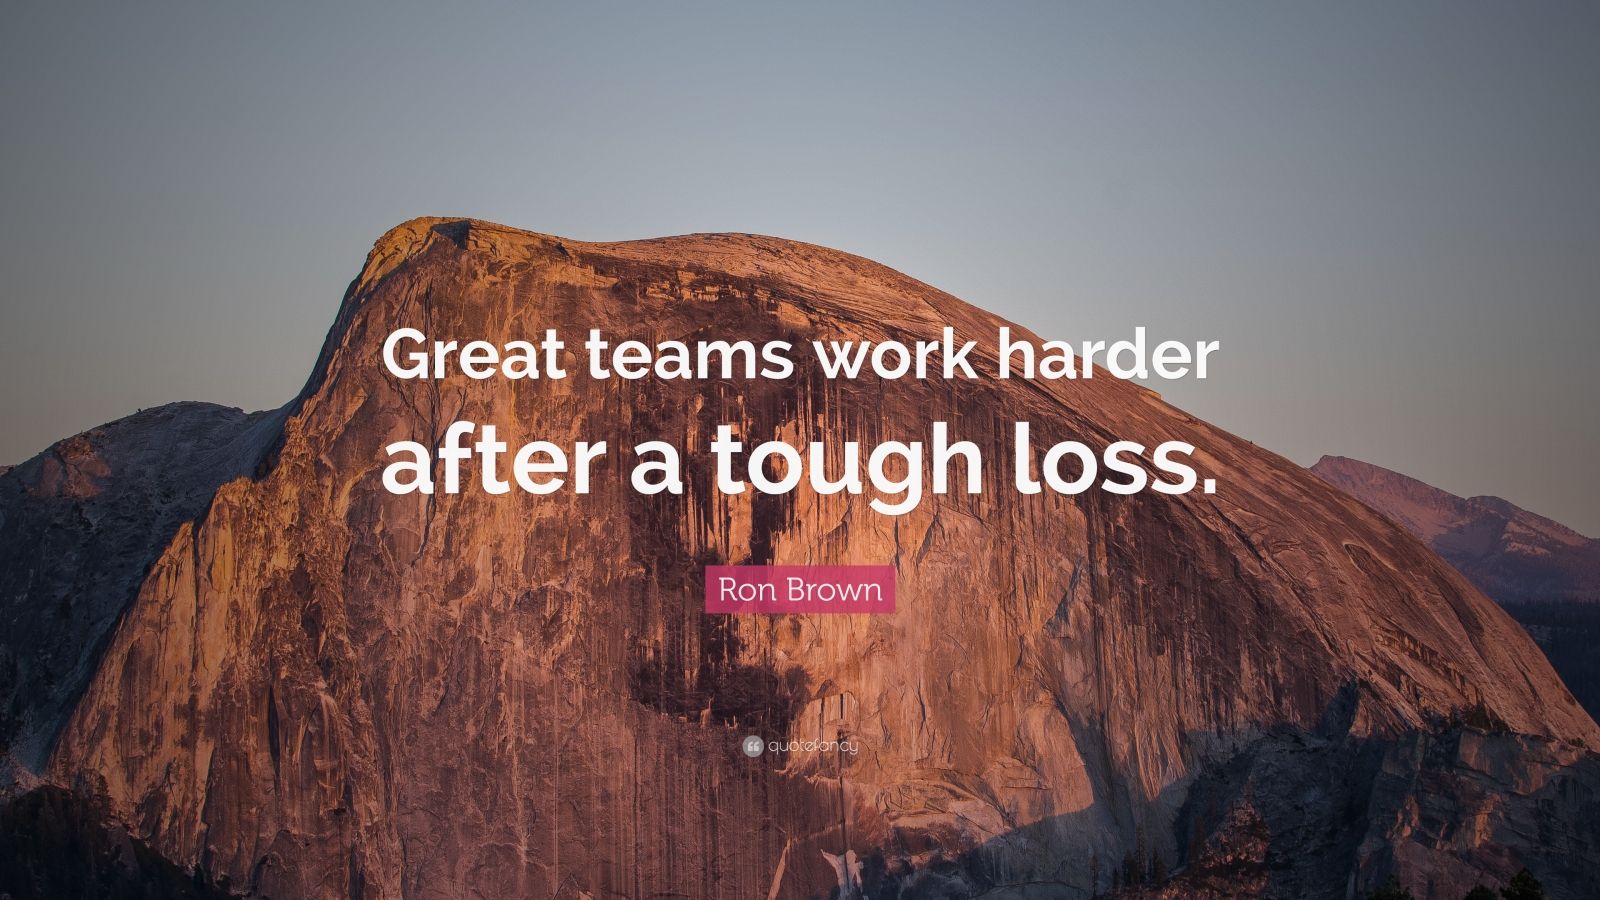 Ron Brown Quote: “Great teams work harder after a tough loss.” (7